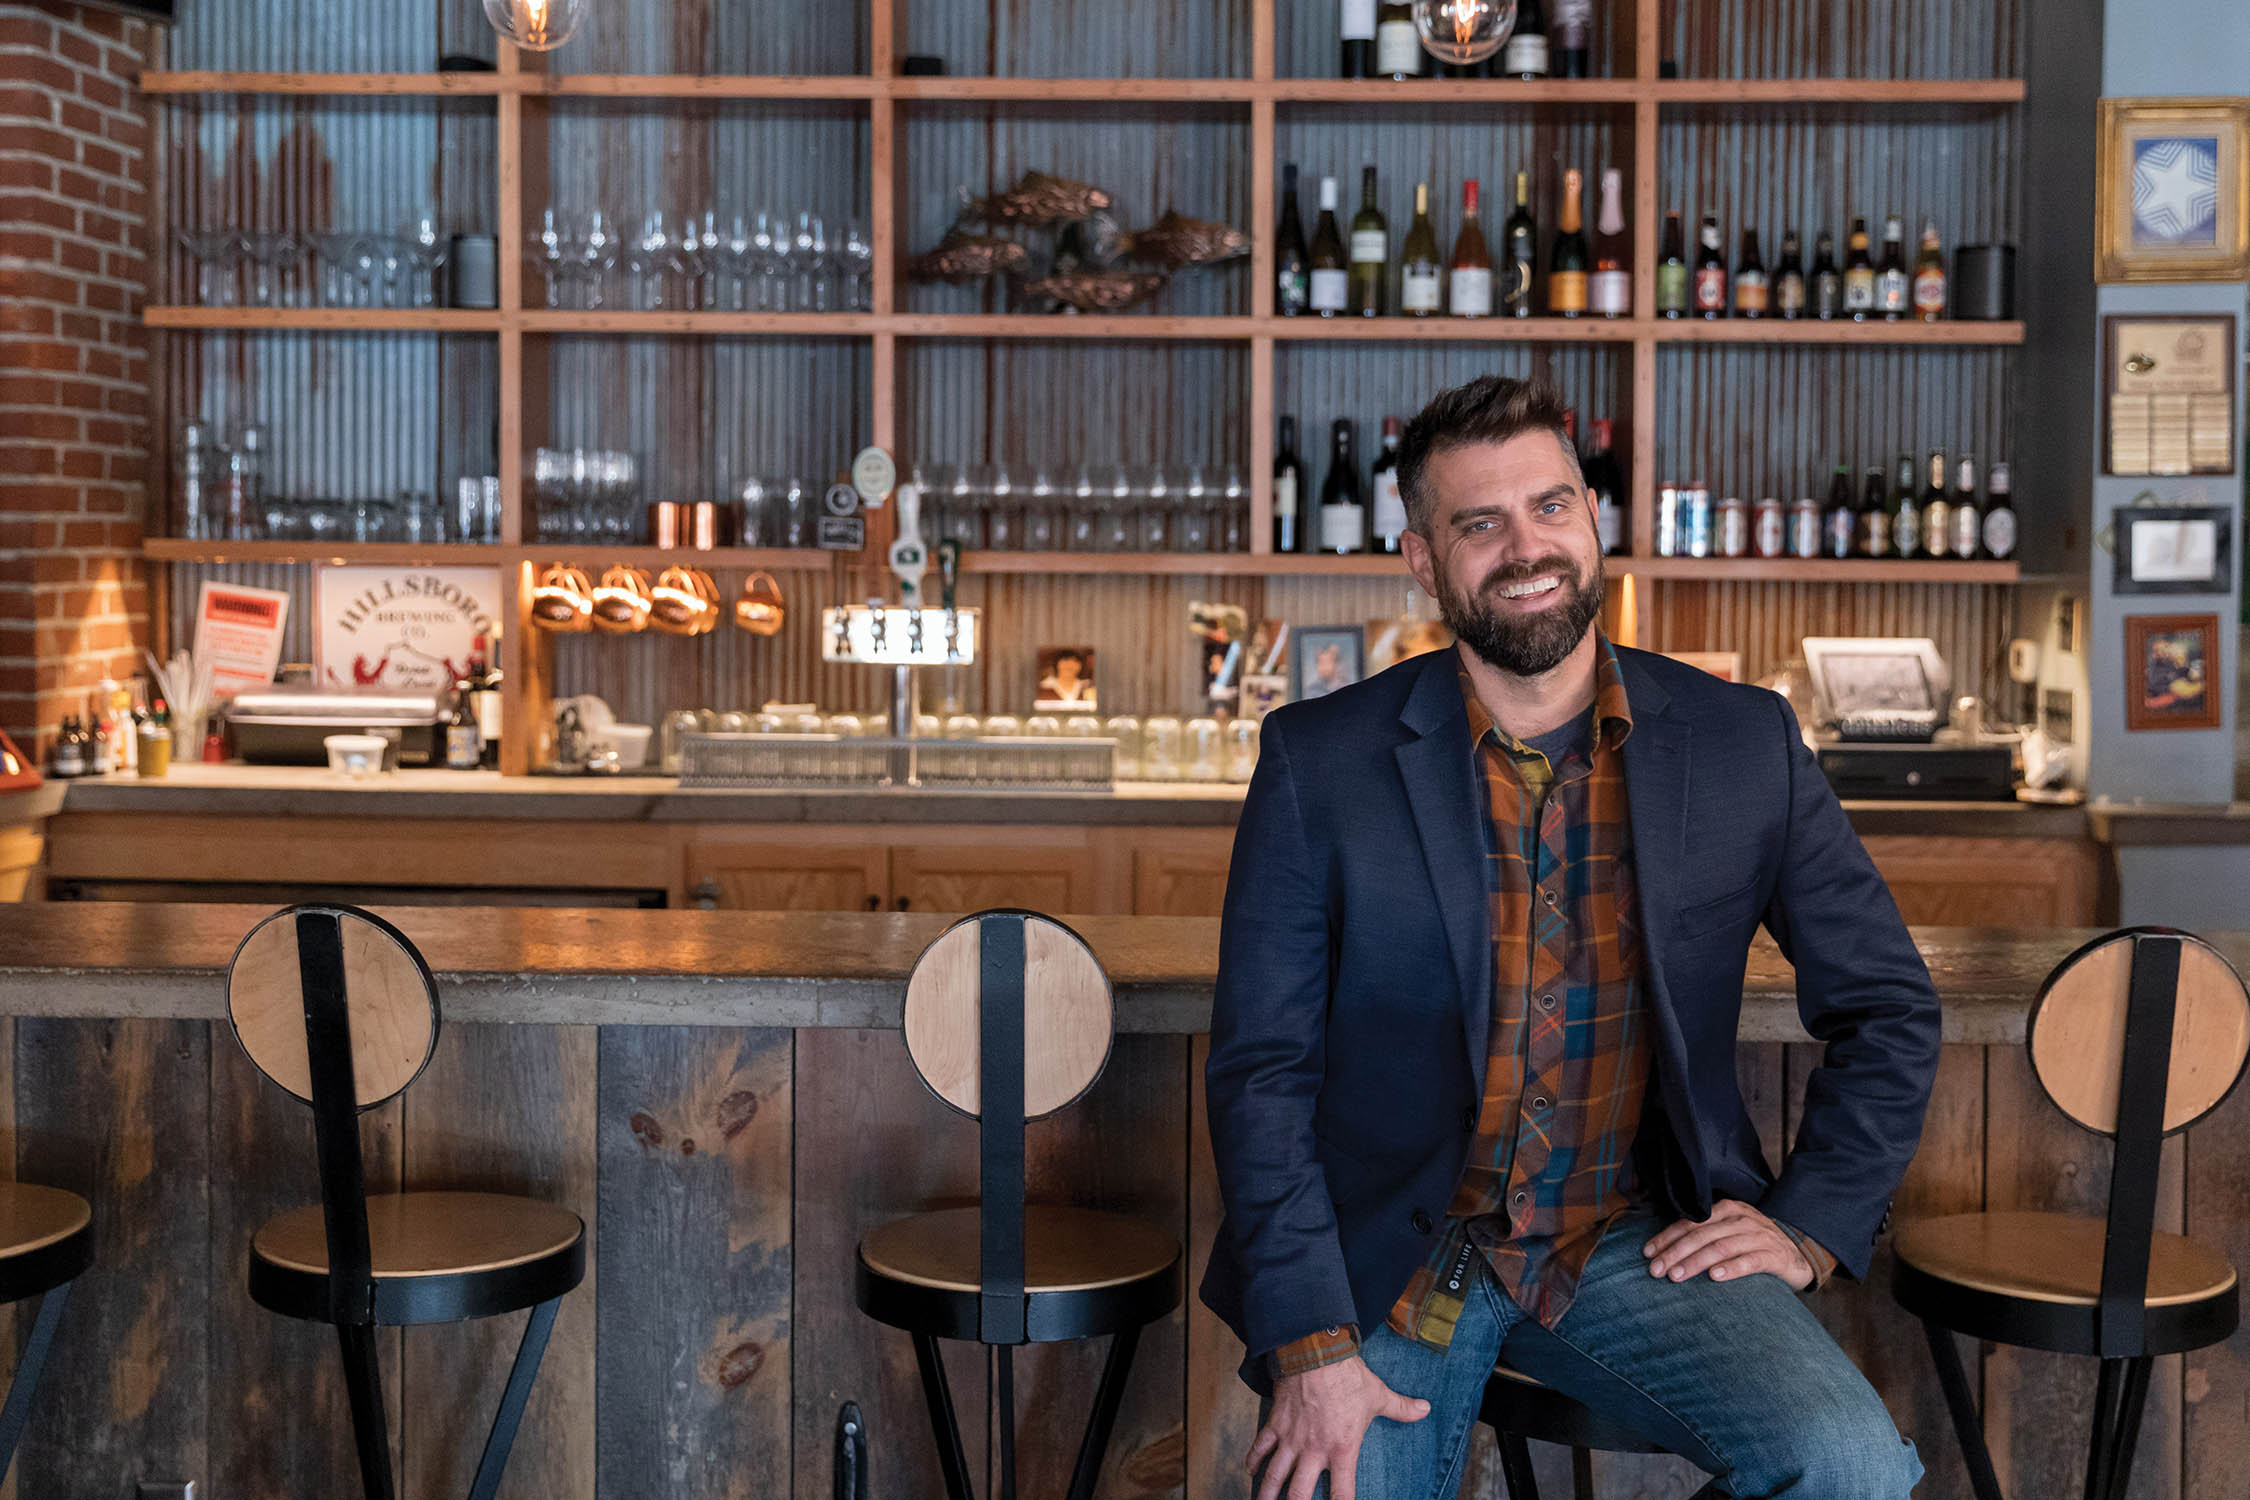 Luke Zahm sits at the bar in his restaurant, Driftless Cafe.